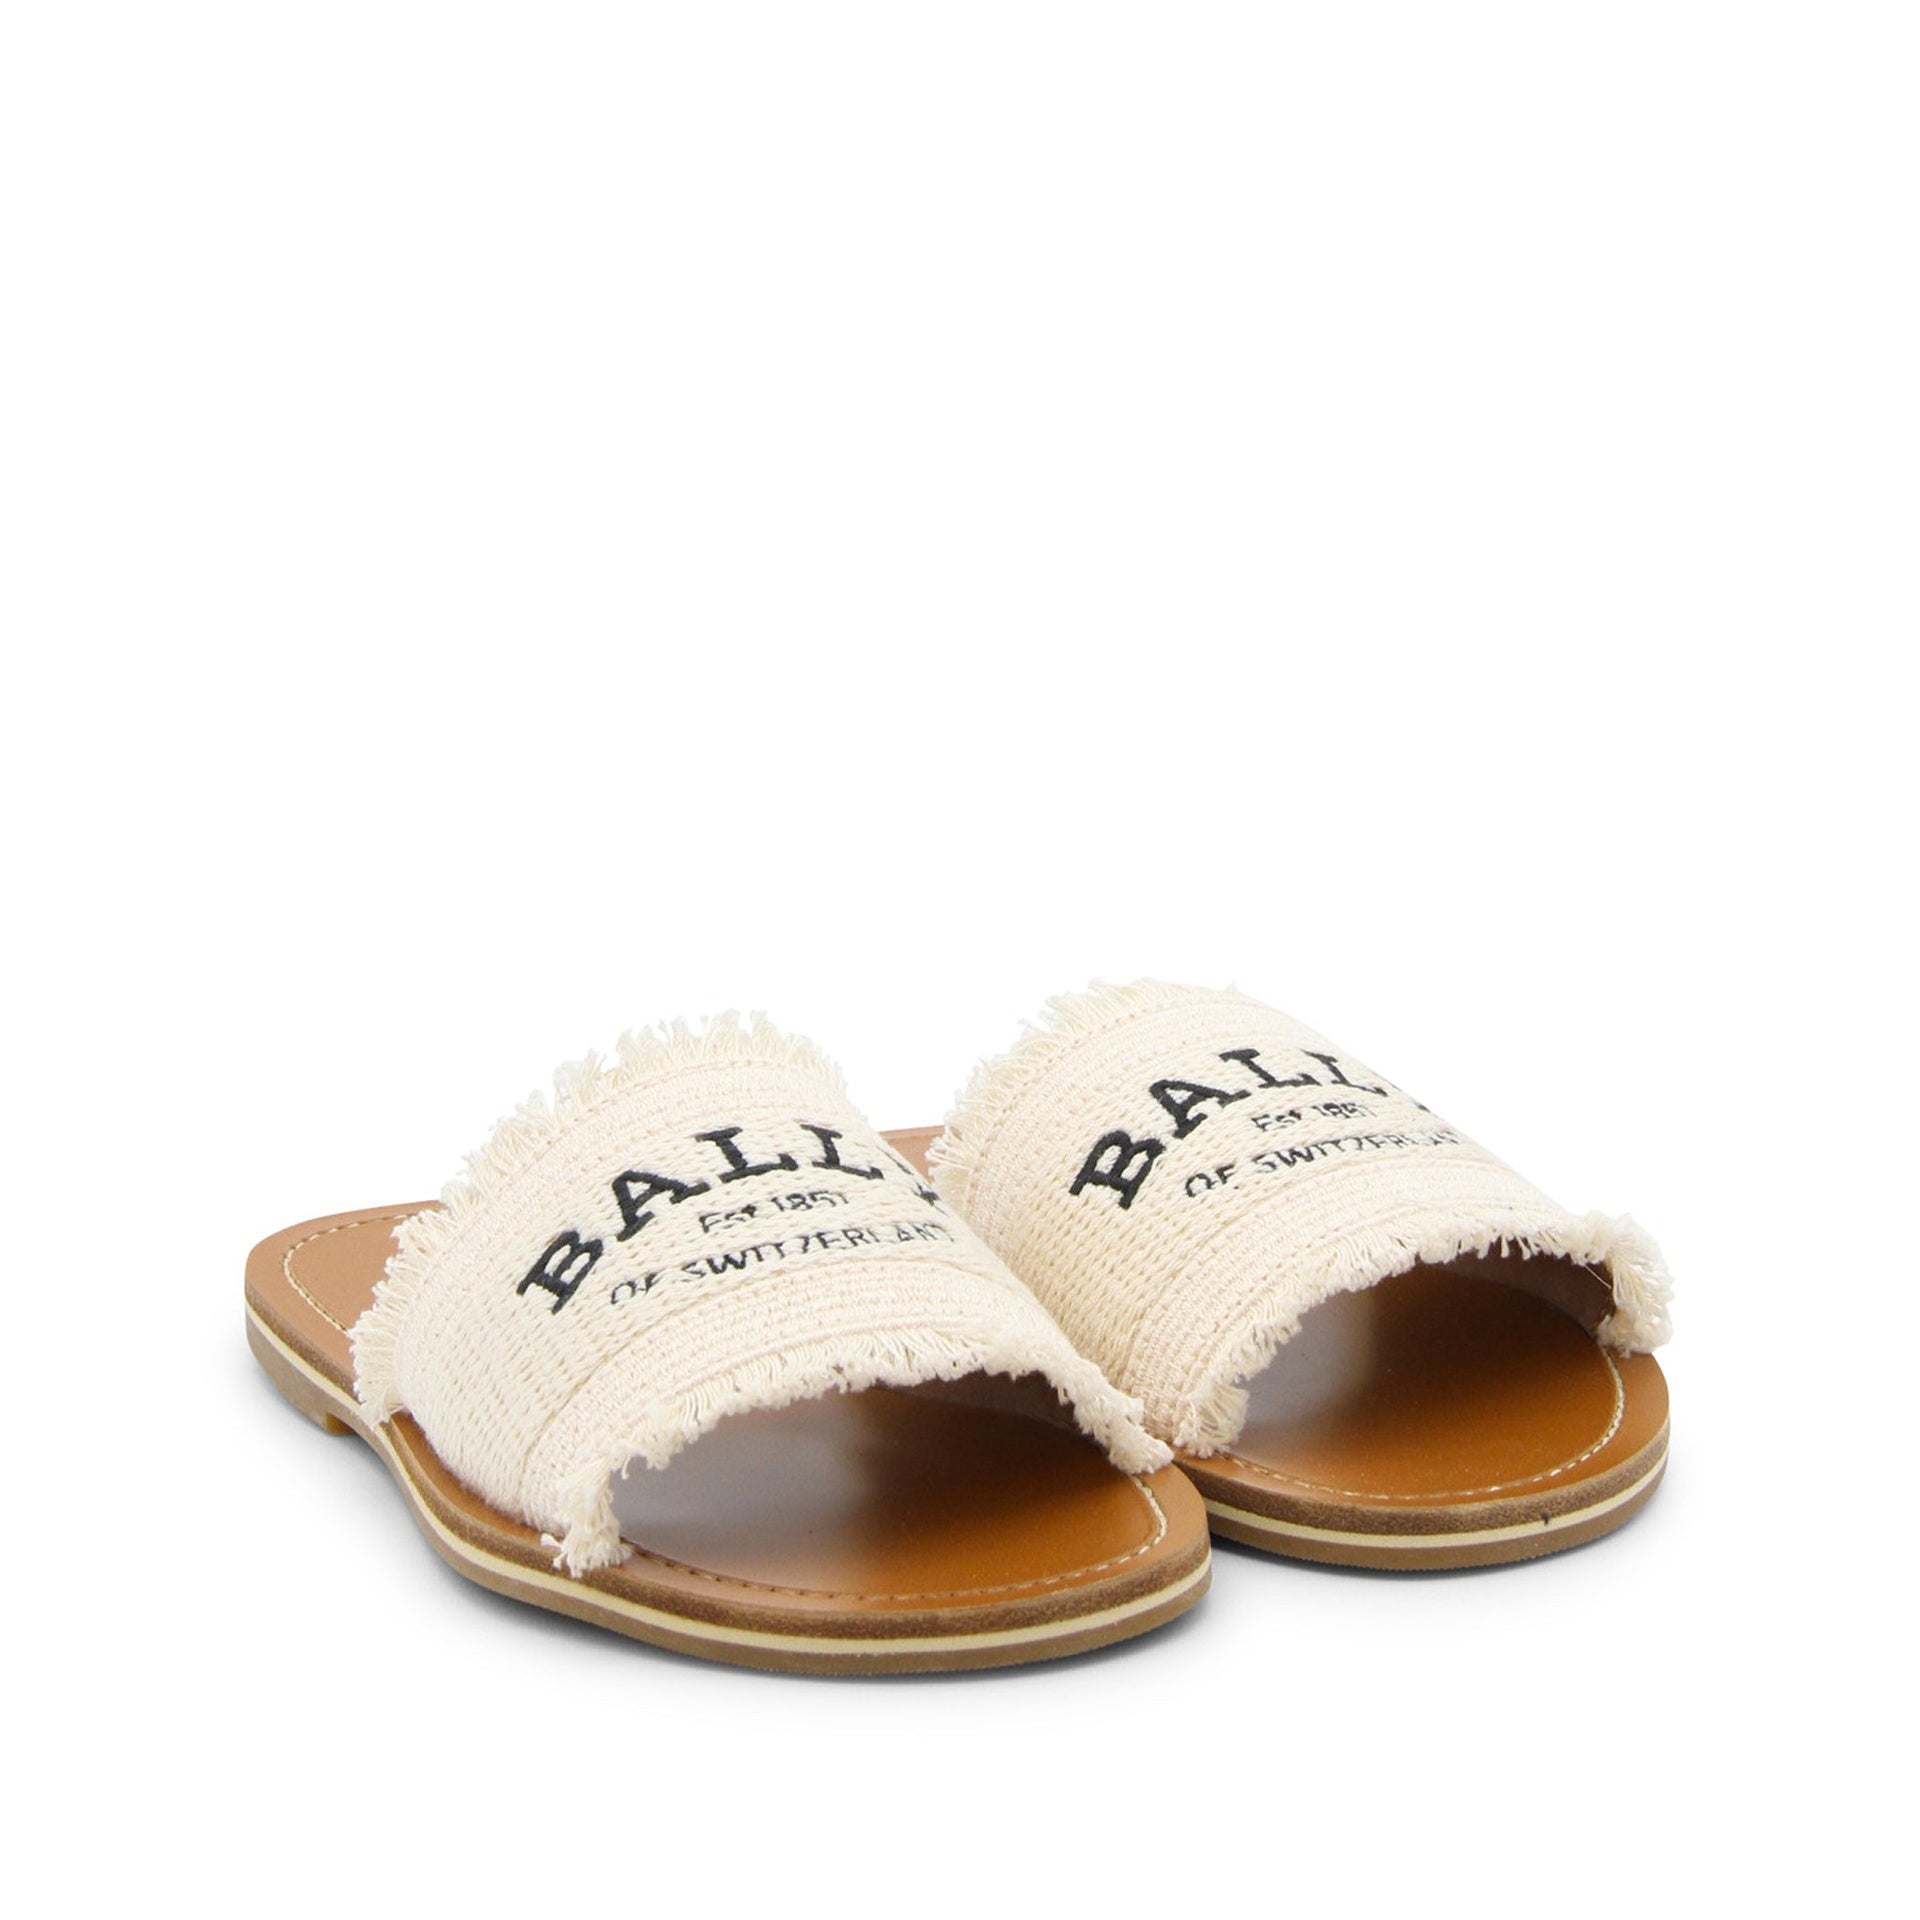 BALLY-OUTLET-SALE-Bally-Logo-Flat-Sandals-Sandalen-ARCHIVE-COLLECTION-4.jpg